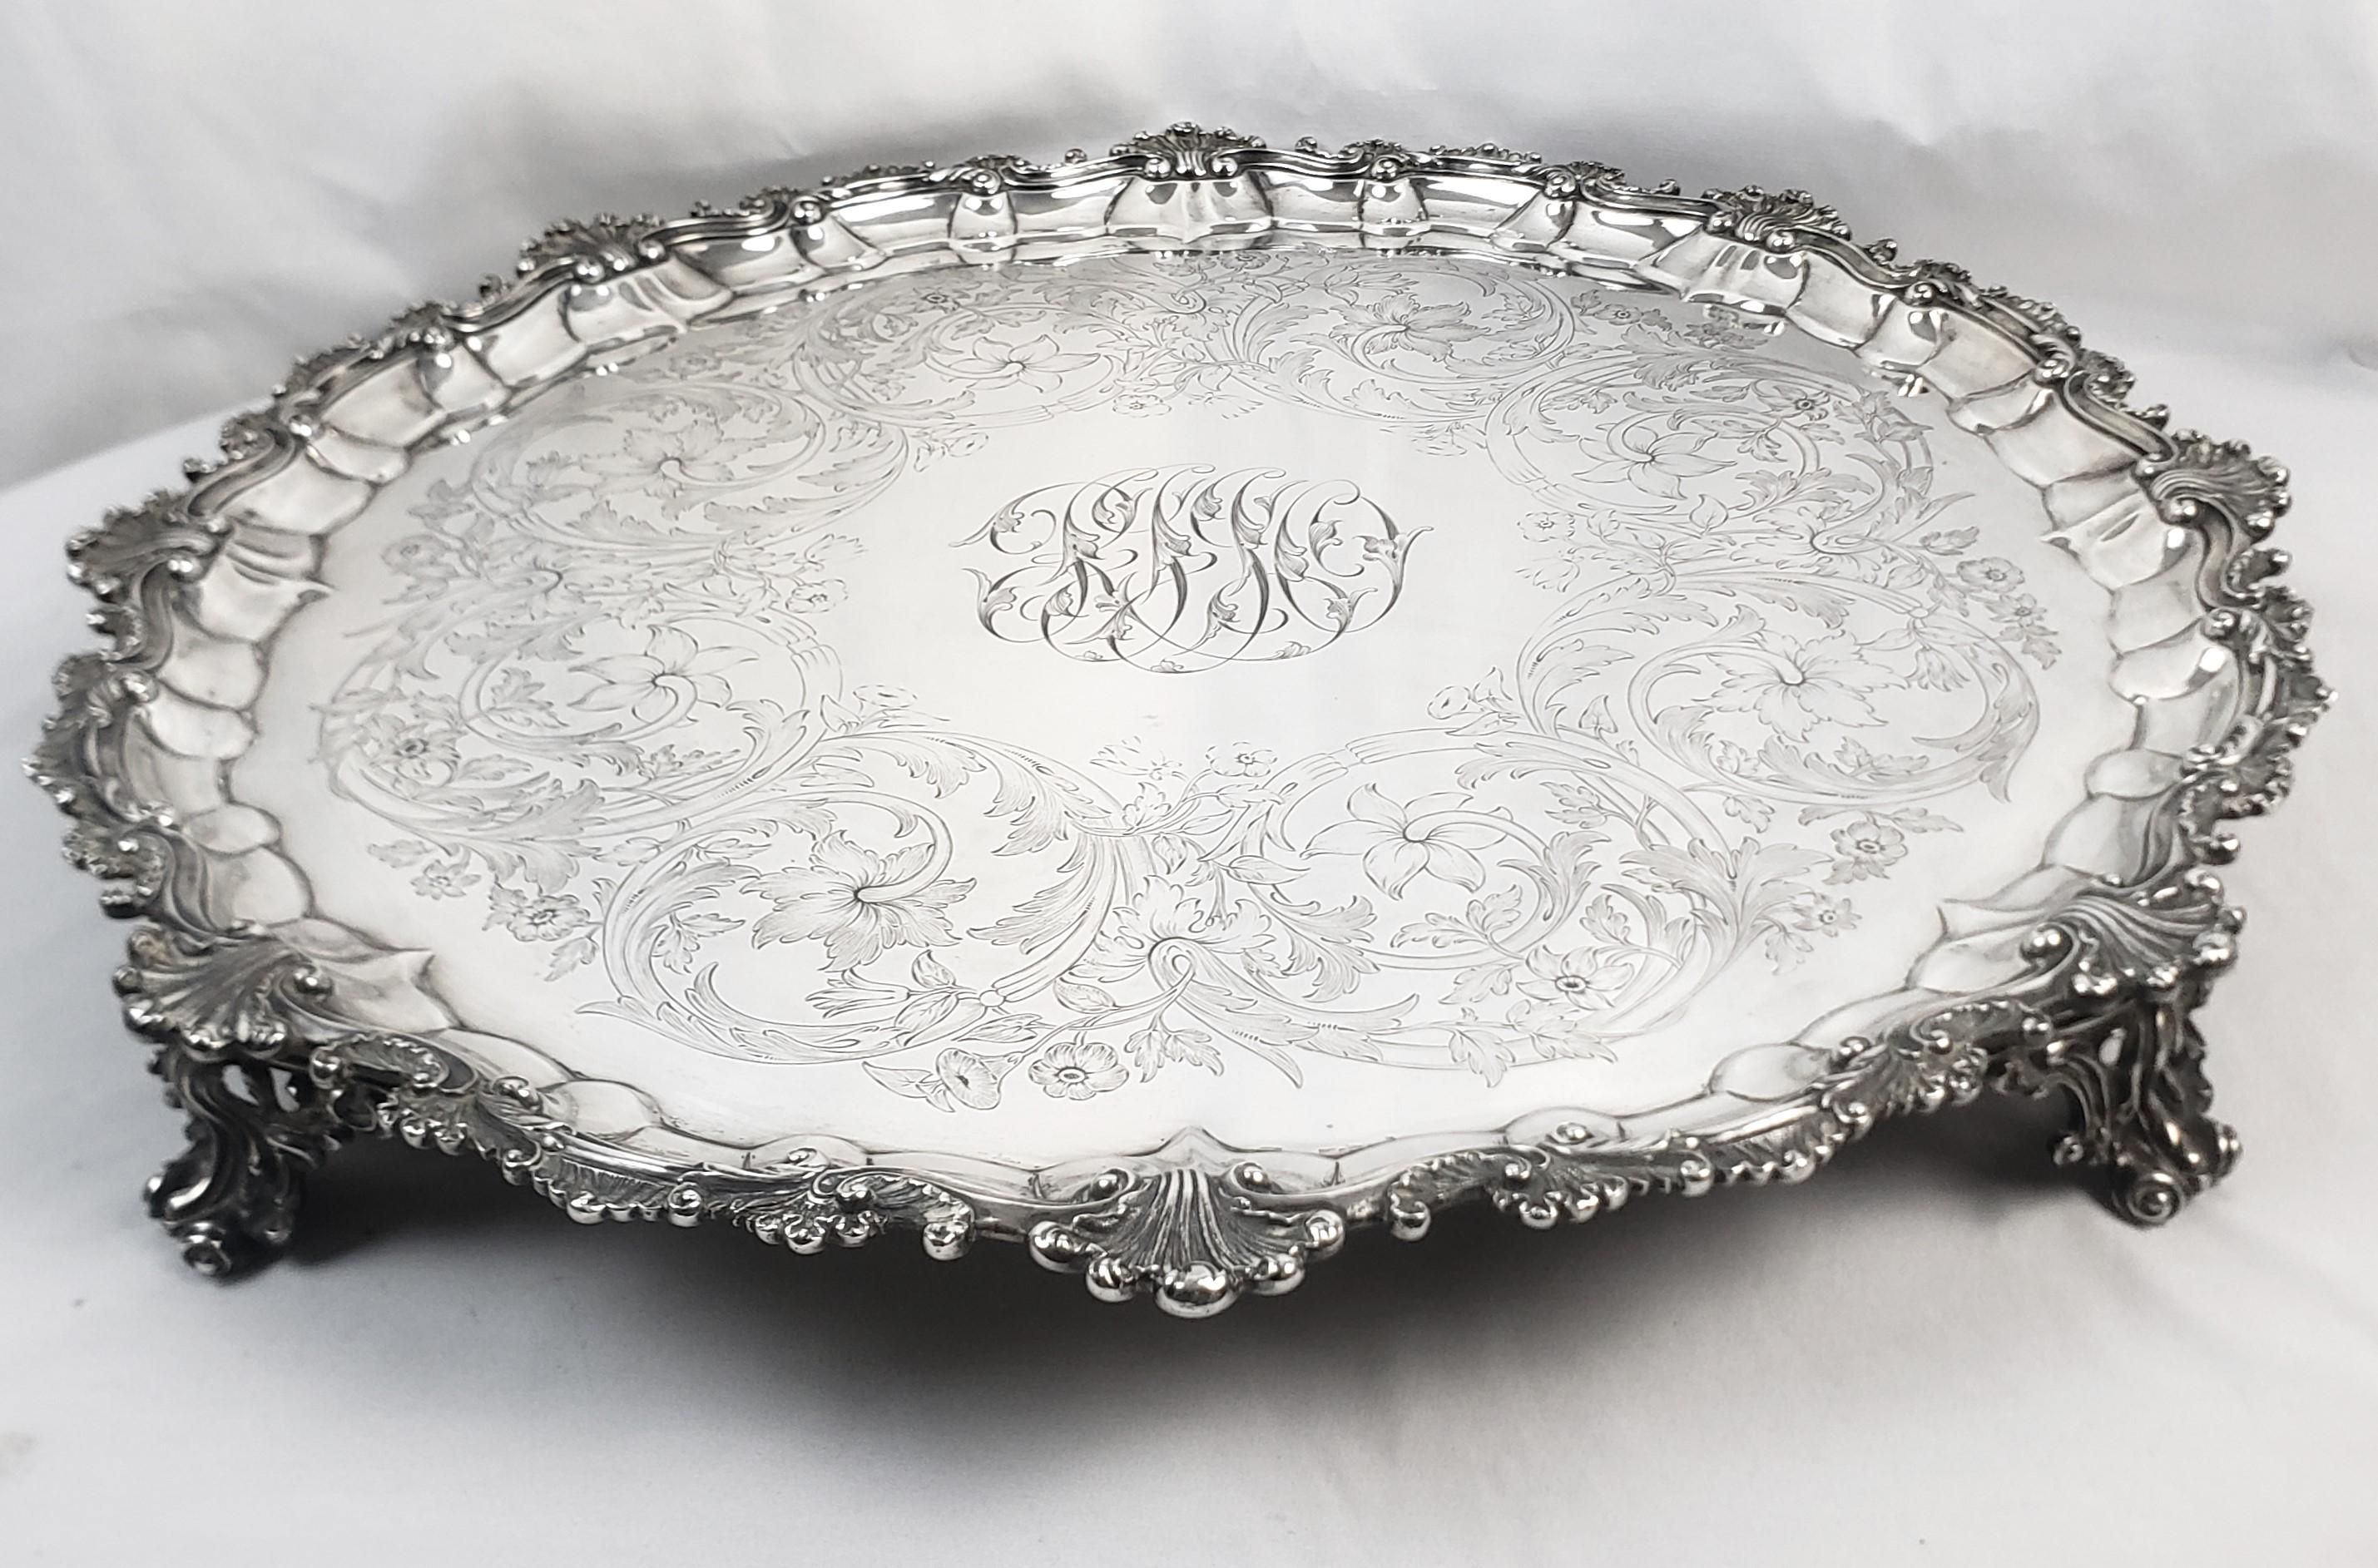 Huge Antique Sterling Silver Salver or Footed Tray with Ornate Floral Engraving In Good Condition For Sale In Hamilton, Ontario